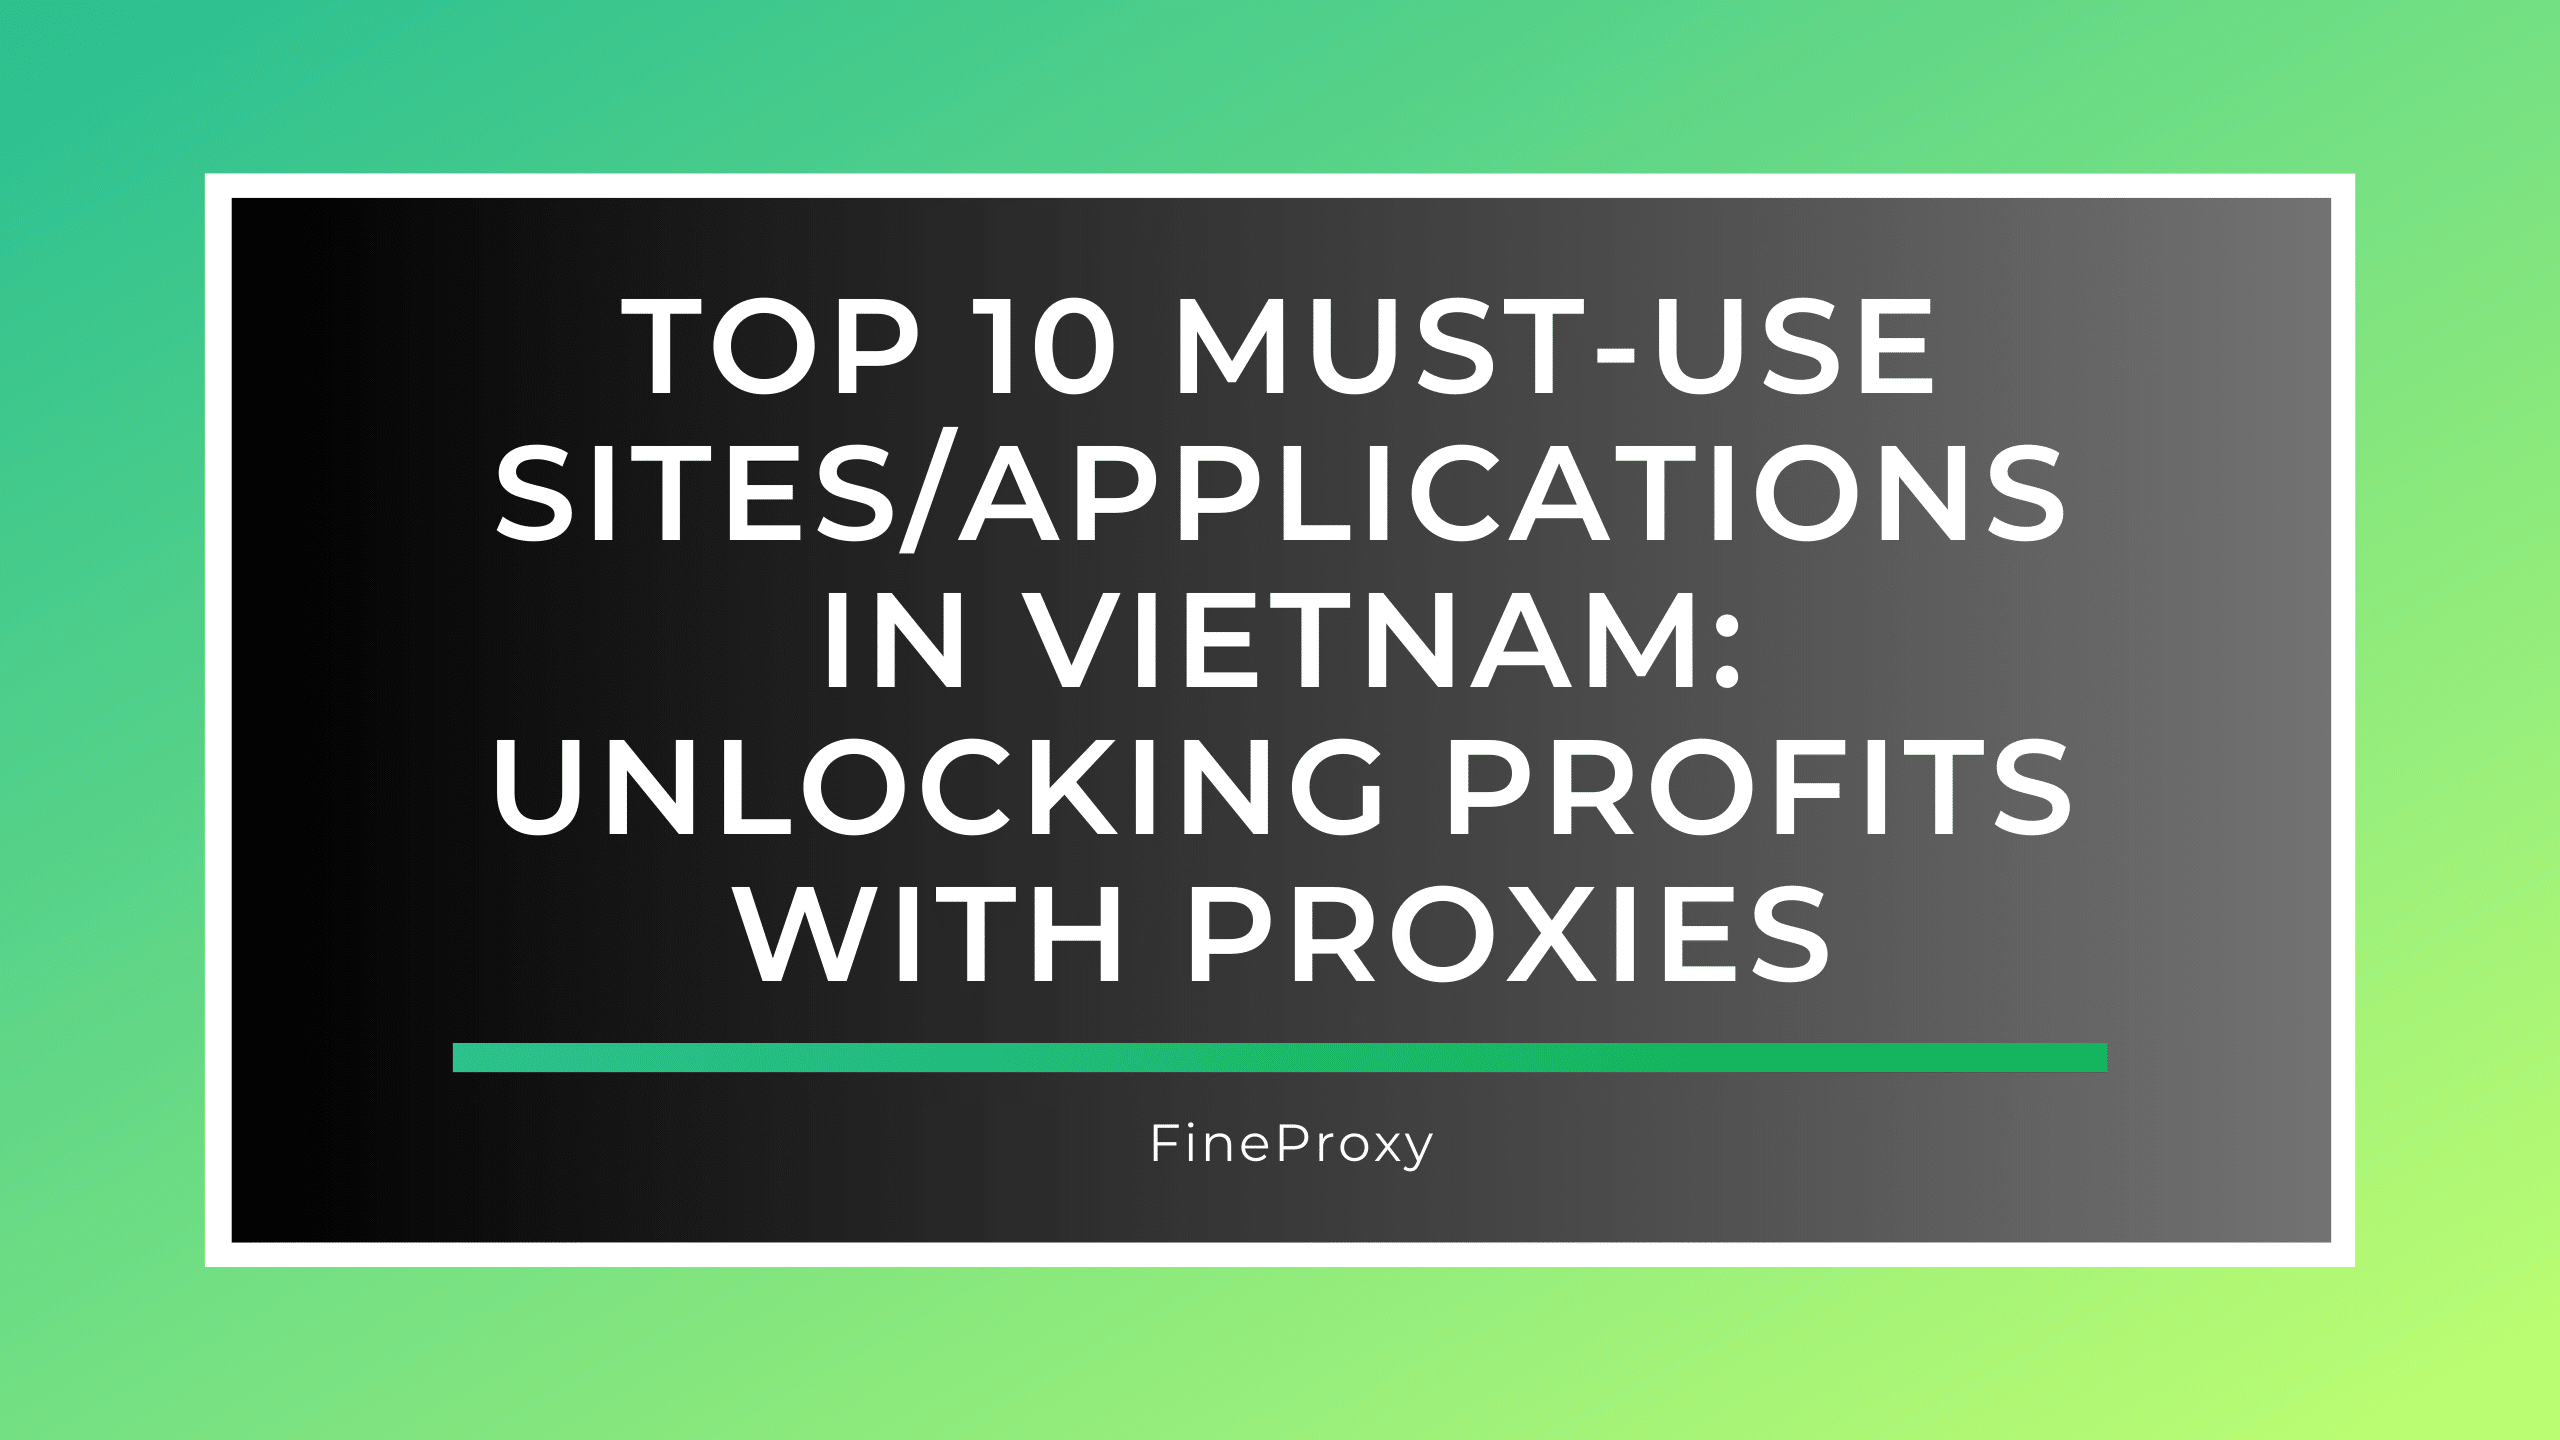 Top 10 Must-Use Sites/Applications in Vietnam: Unlocking Profits with Proxies